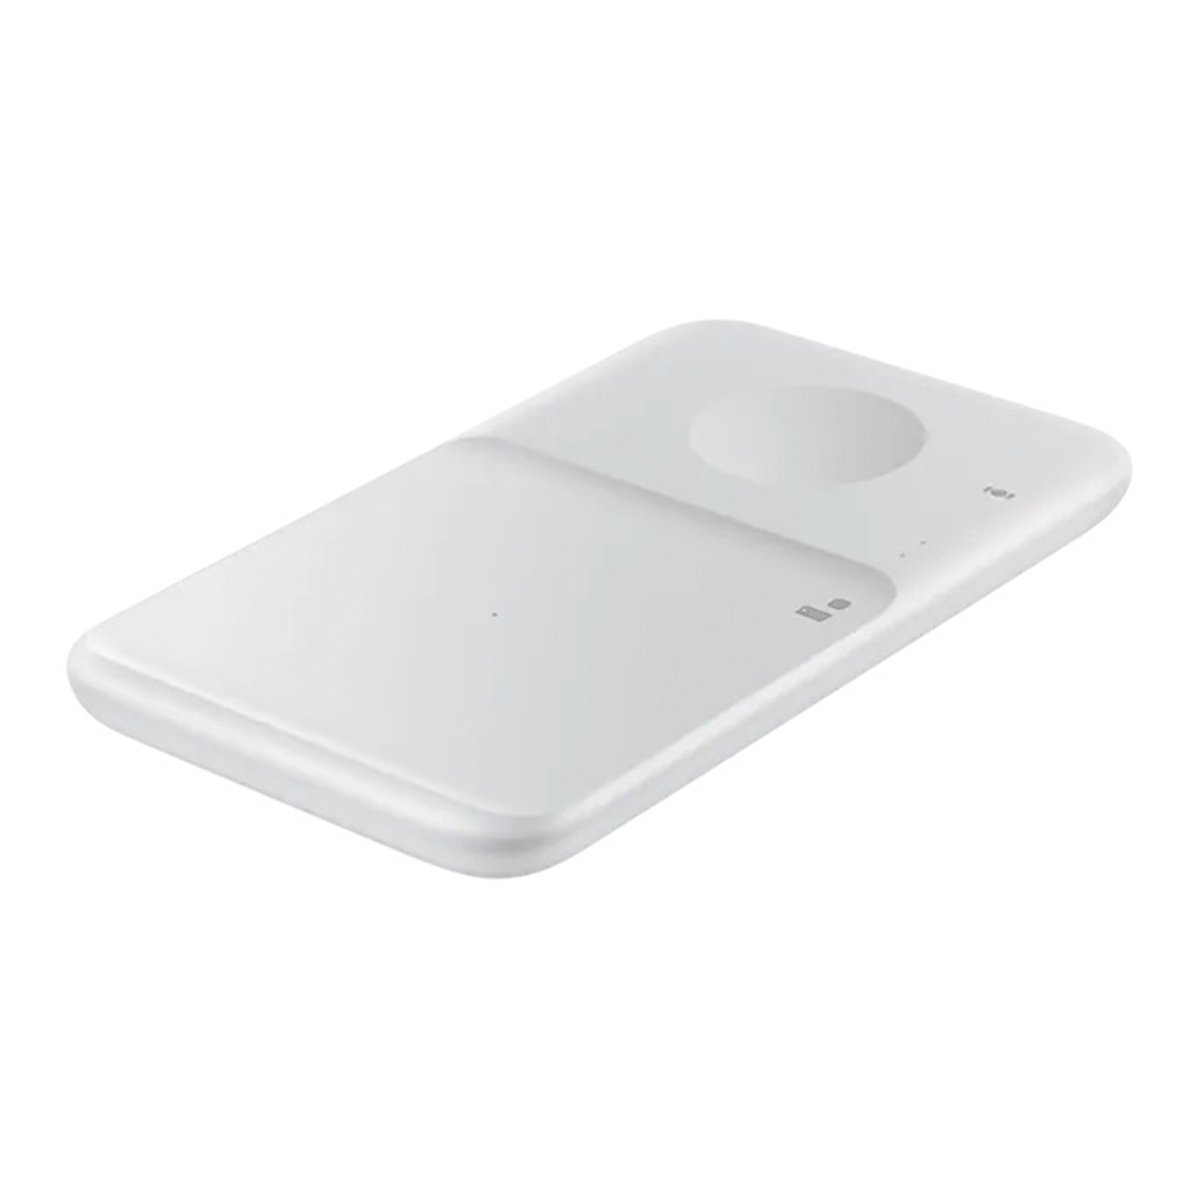 Samsung Wireless Charger Duo with Travel Adaptor P4300 White